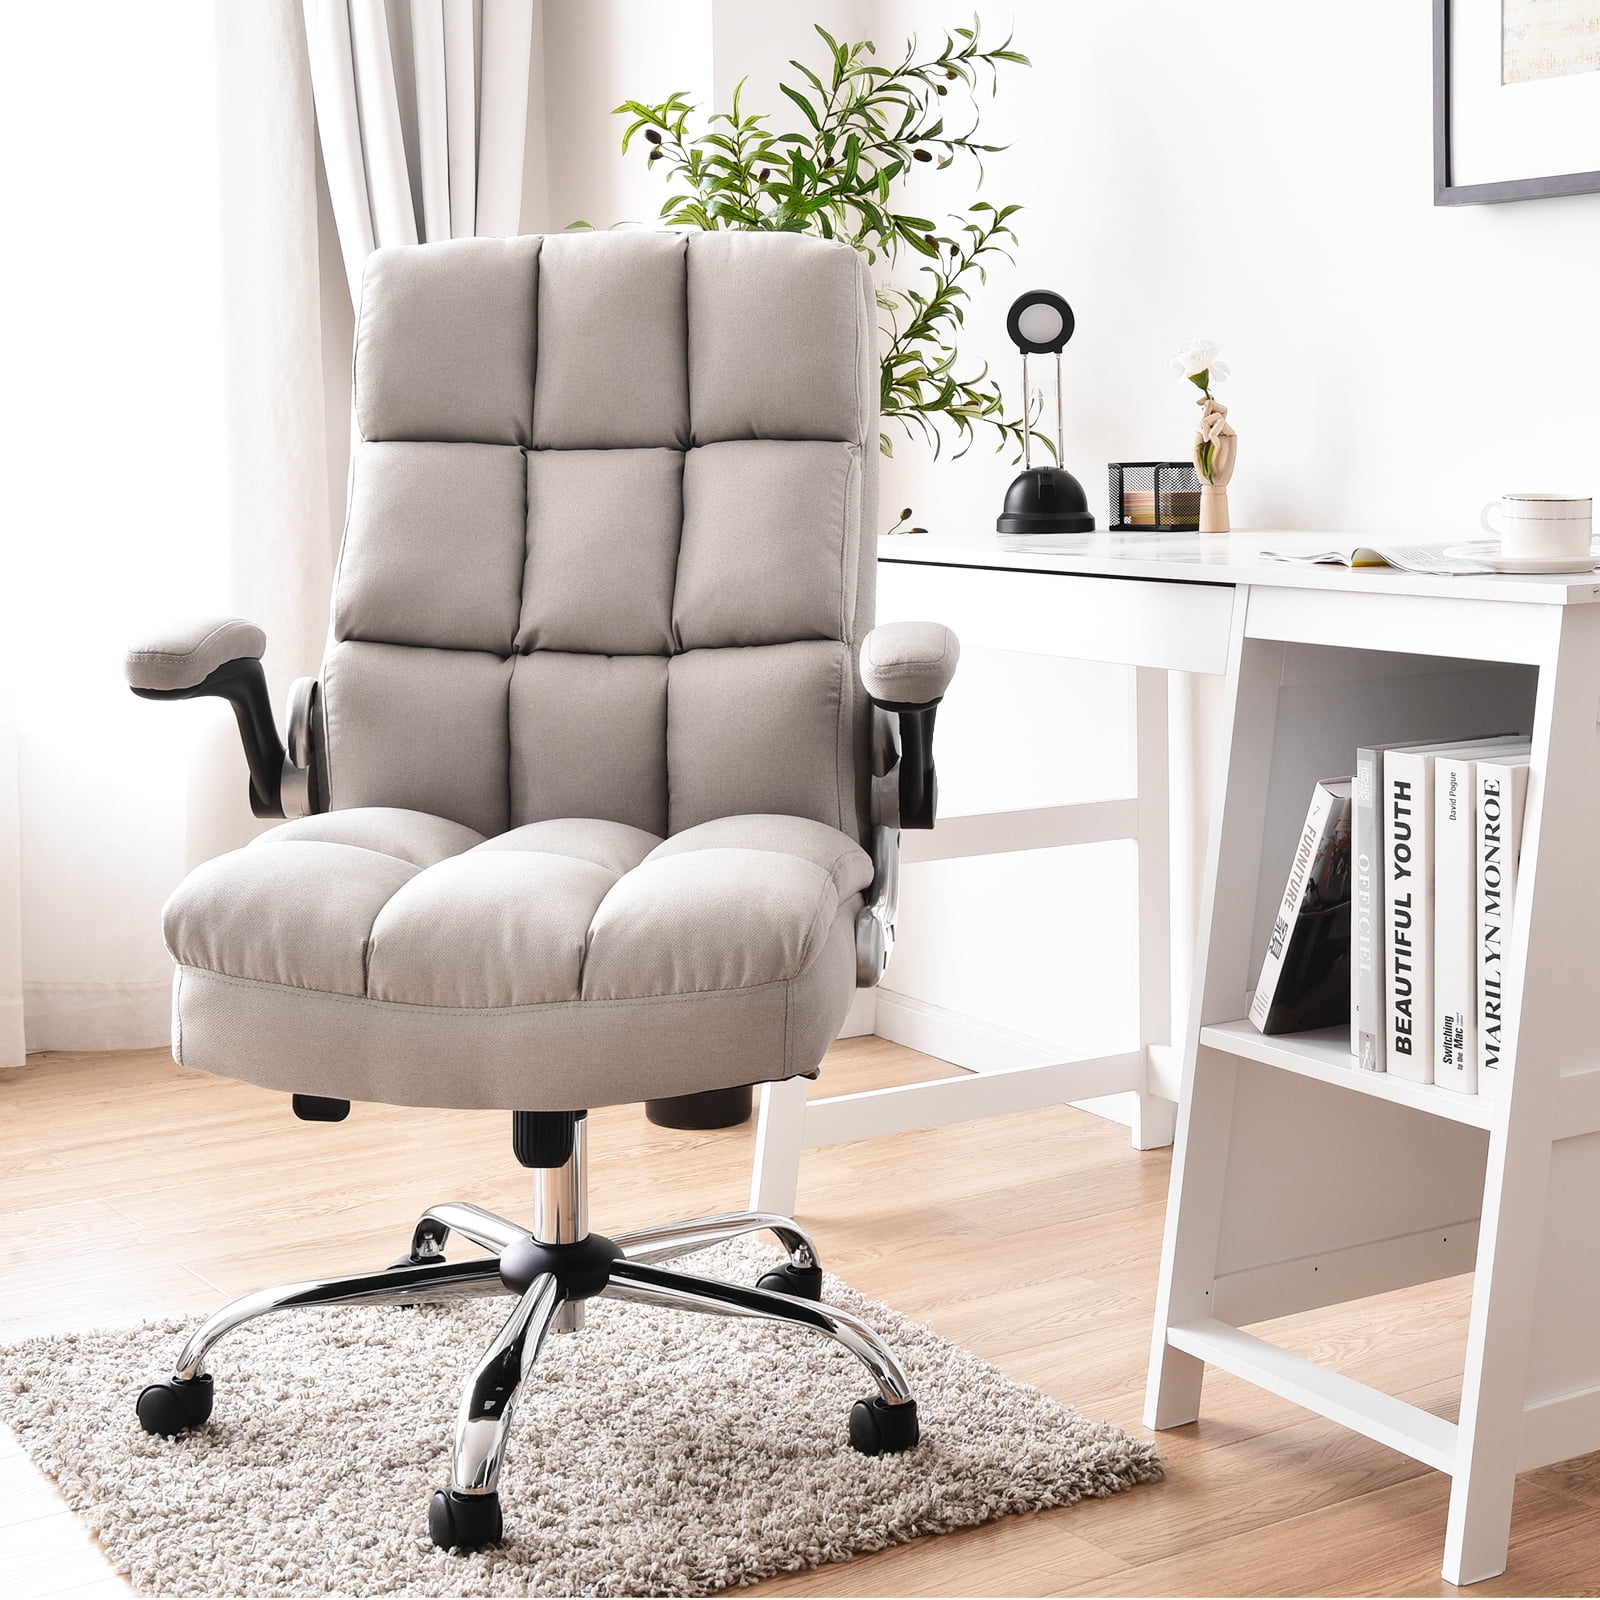 SEATZONE High Back Fabric Home Office Chair with Swivel, Executive Computer  Desk Adjustable Tilt and Flip-up Armrest, Comfy Thick Padding Ergonomic